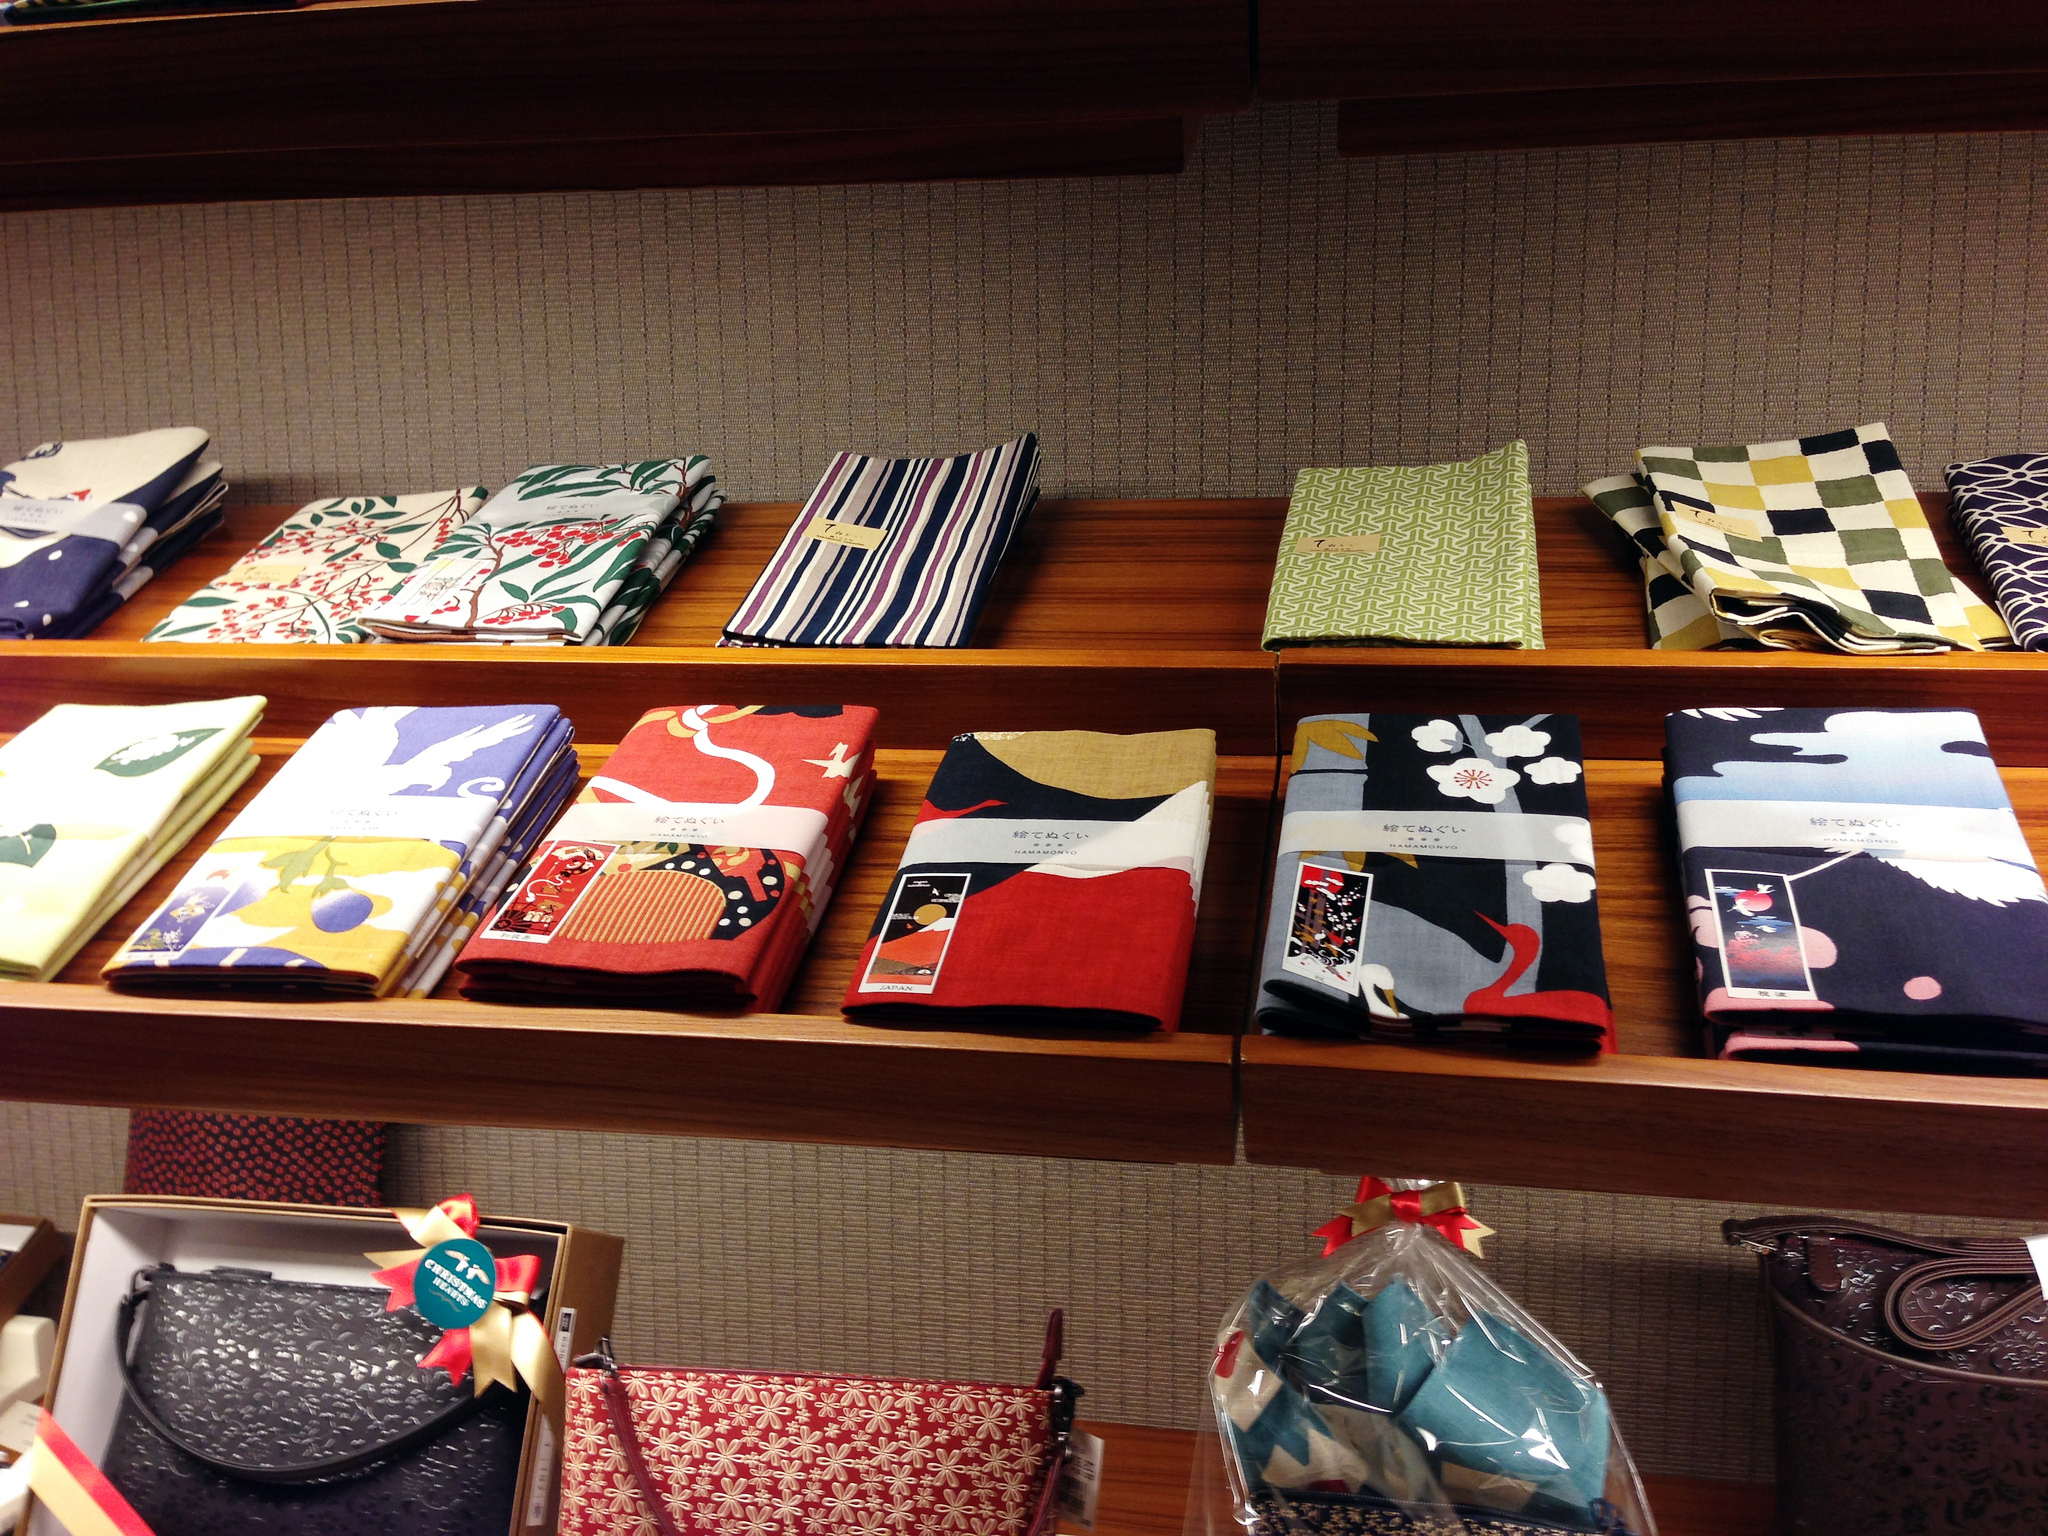 Japanese prints at the Matsuya department store in Tokyo. Photo by alphacityguides.